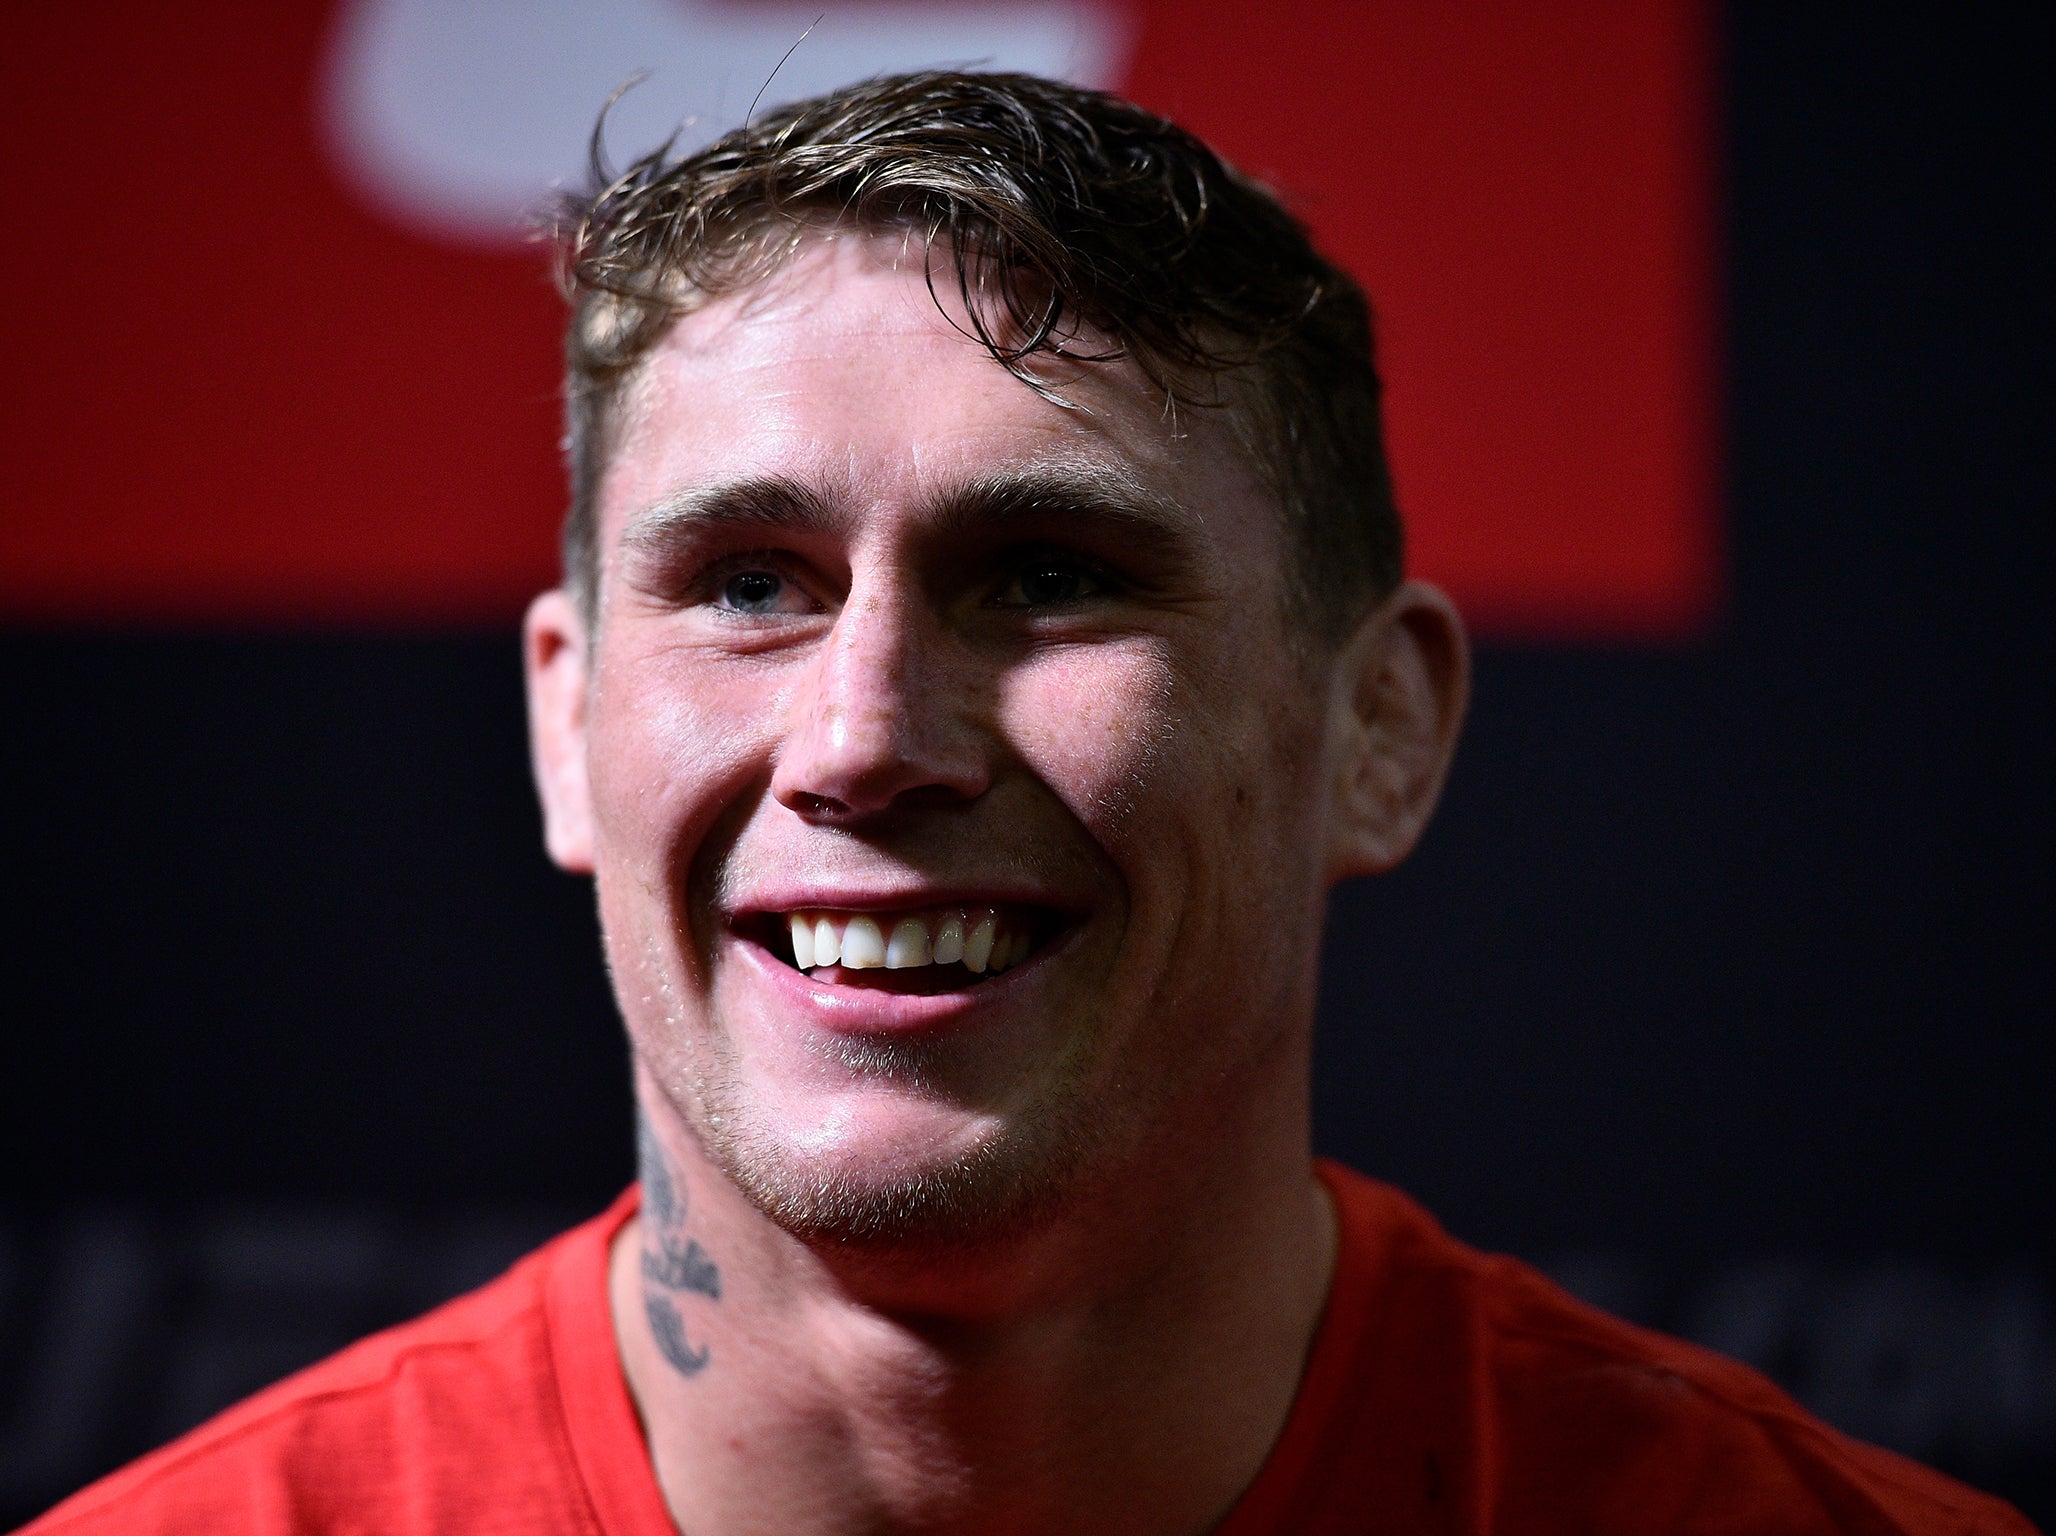 Darren Till is to headline the UFC's first event in Liverpool